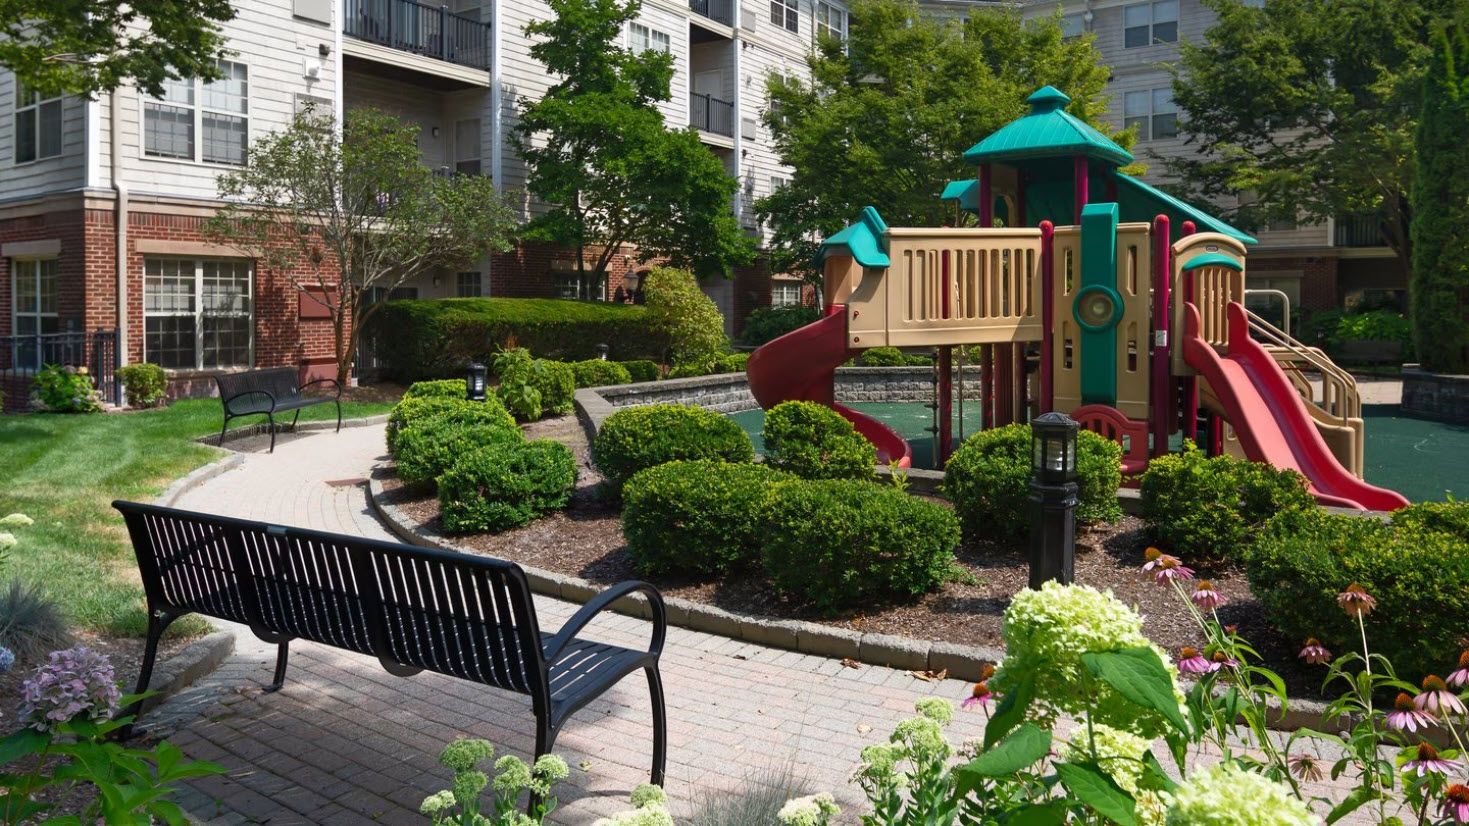 Playground with benches and green landscapes